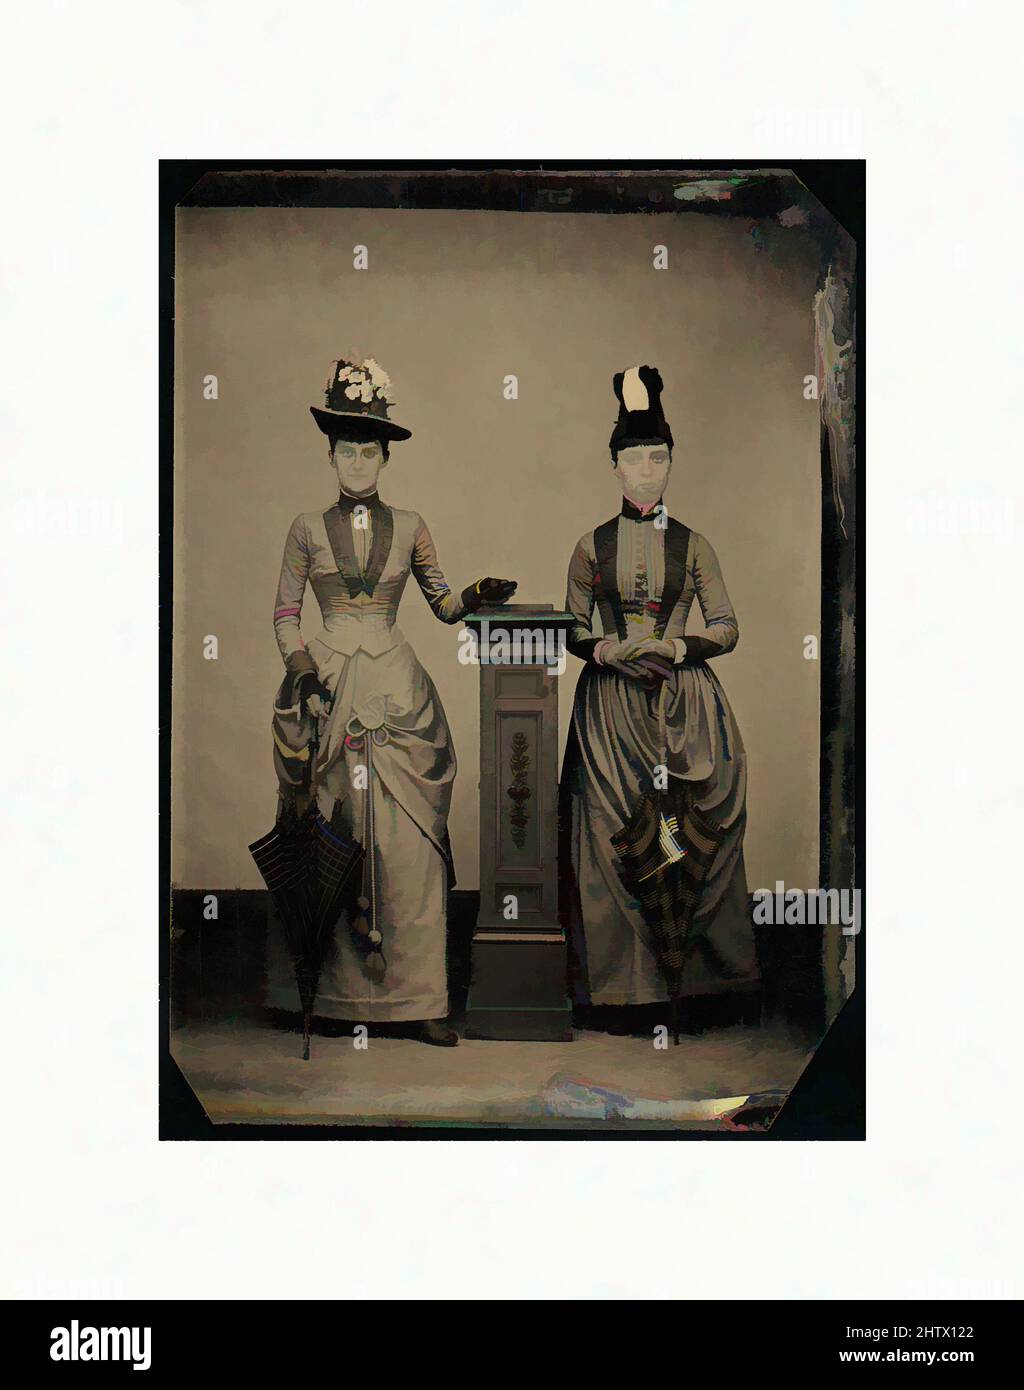 Art inspired by Two Women, ca. 1870, Tintype, 8.9 x 6.4 cm (3 1/2 x 2 1/2 in.), Photographs, Unknown (American, Classic works modernized by Artotop with a splash of modernity. Shapes, color and value, eye-catching visual impact on art. Emotions through freedom of artworks in a contemporary way. A timeless message pursuing a wildly creative new direction. Artists turning to the digital medium and creating the Artotop NFT Stock Photo